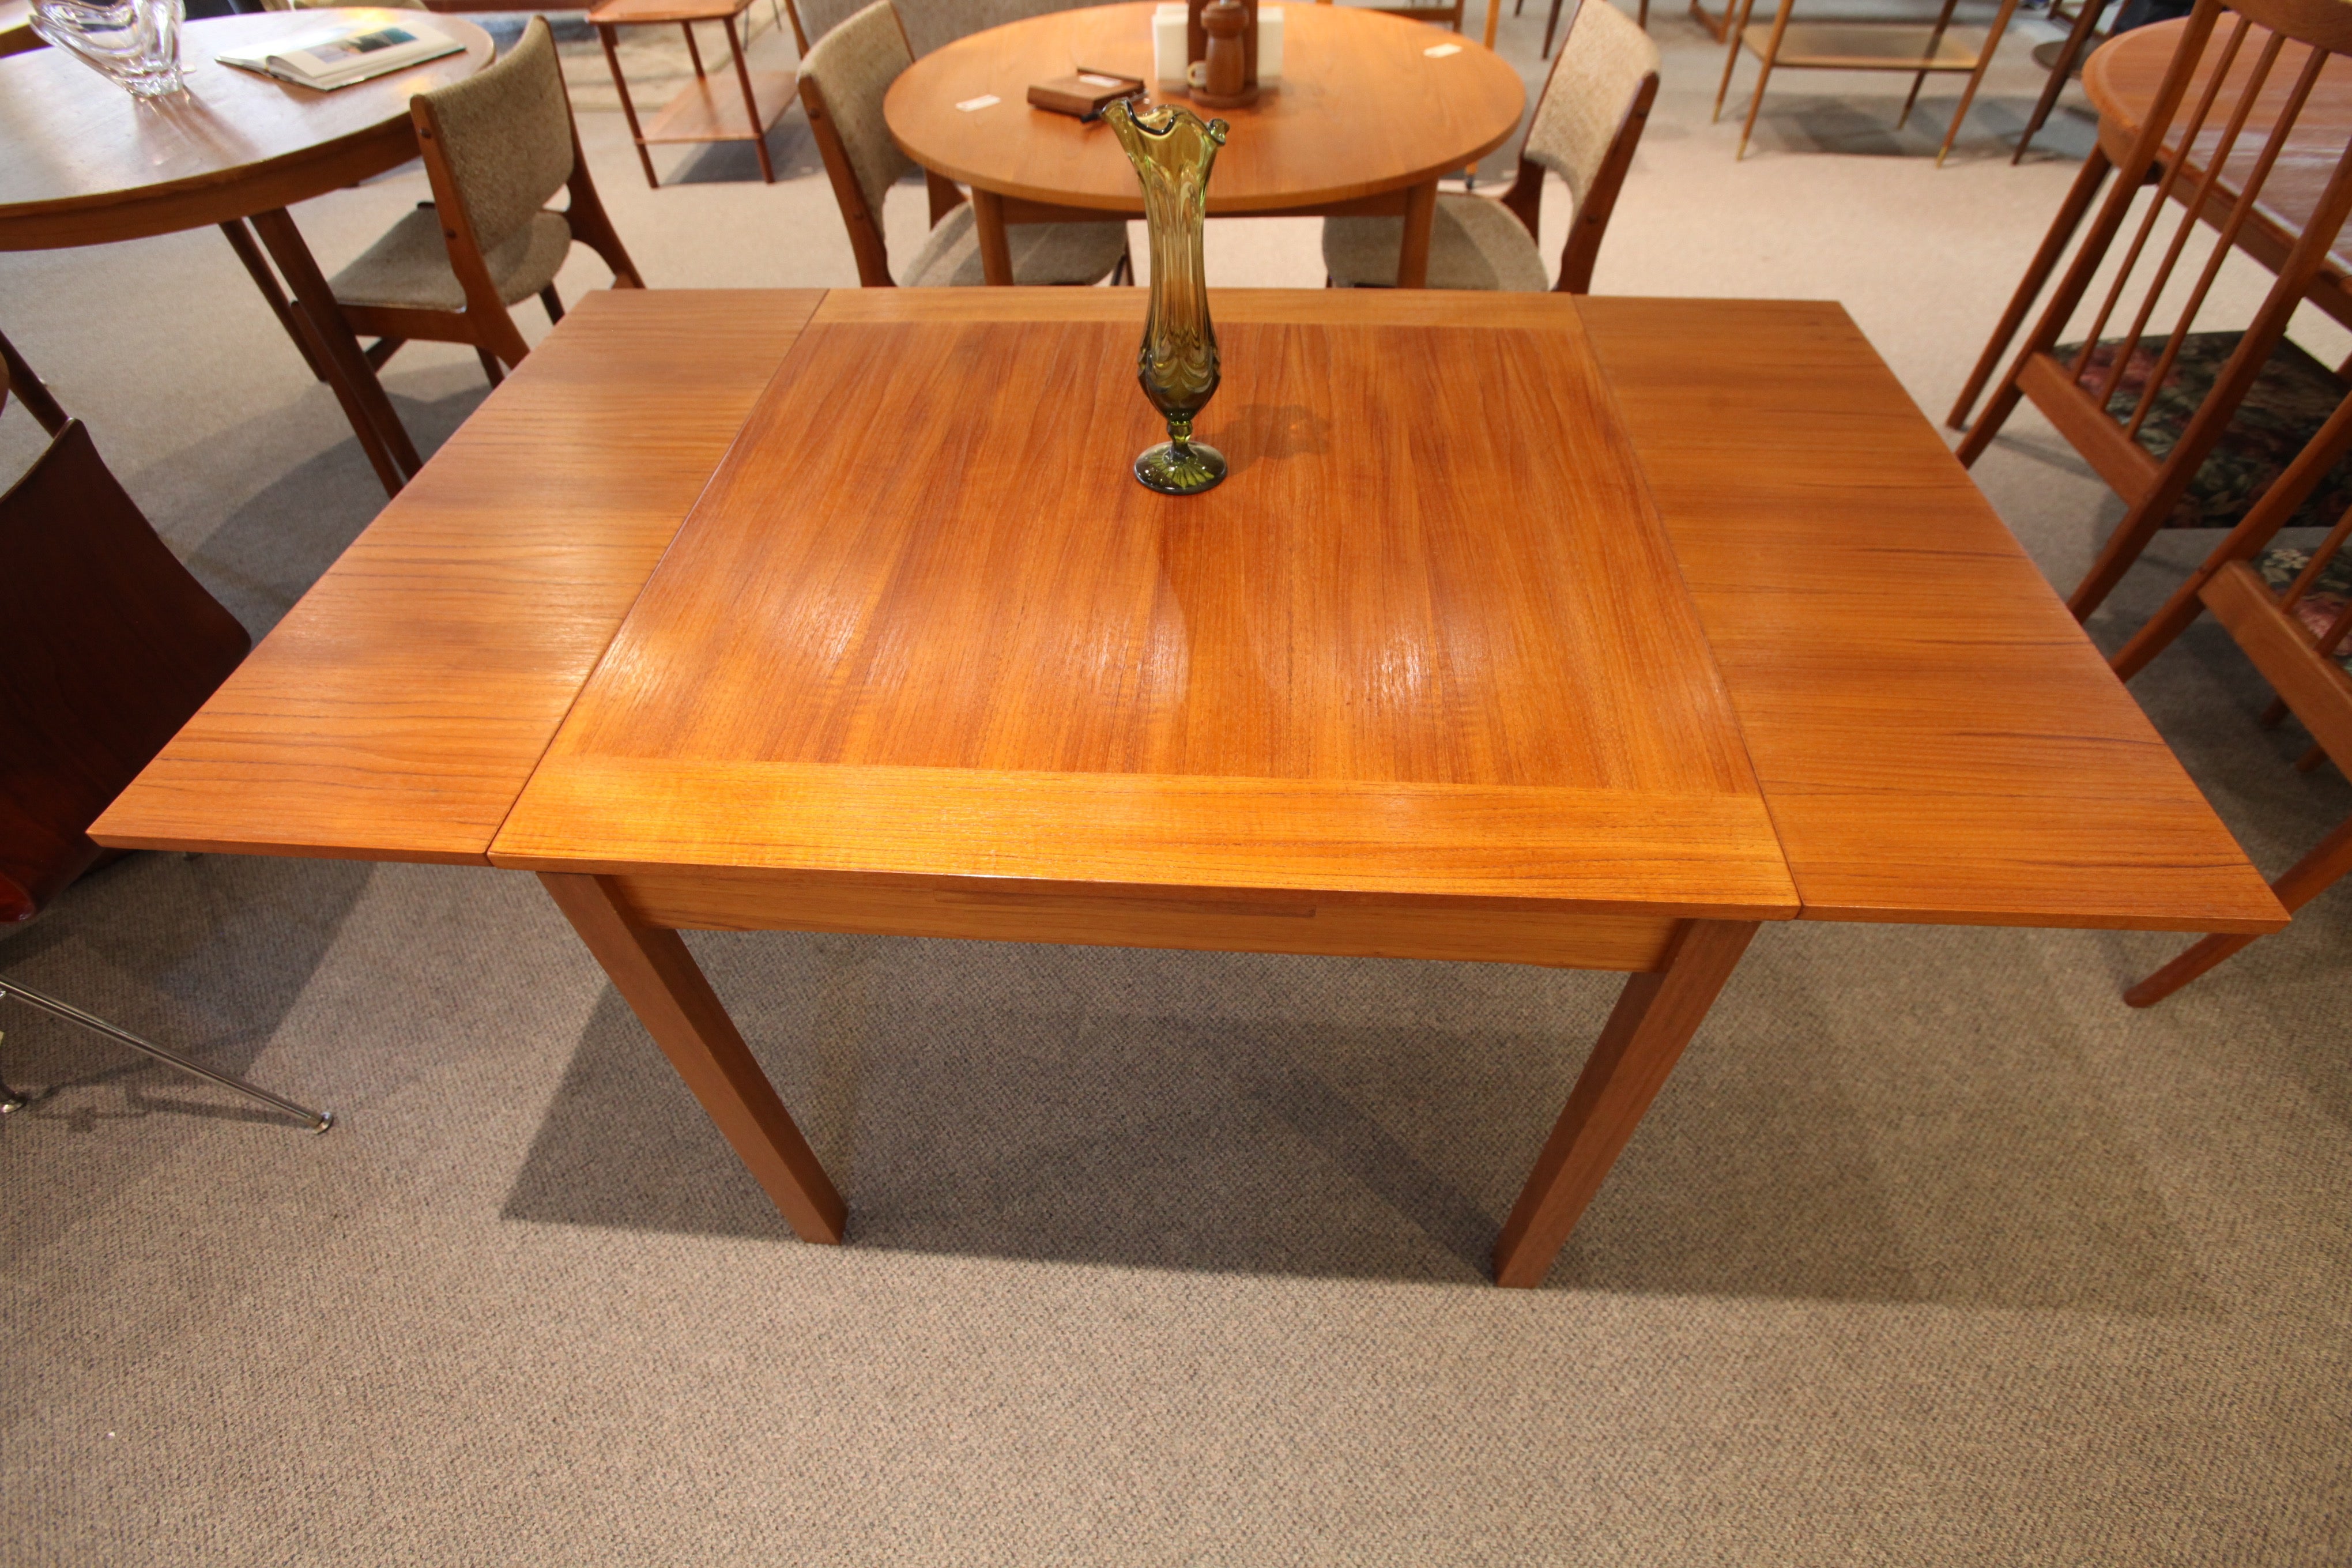 Small Danish Teak Extension Table (33.5" x 57") or (33.5" Square)